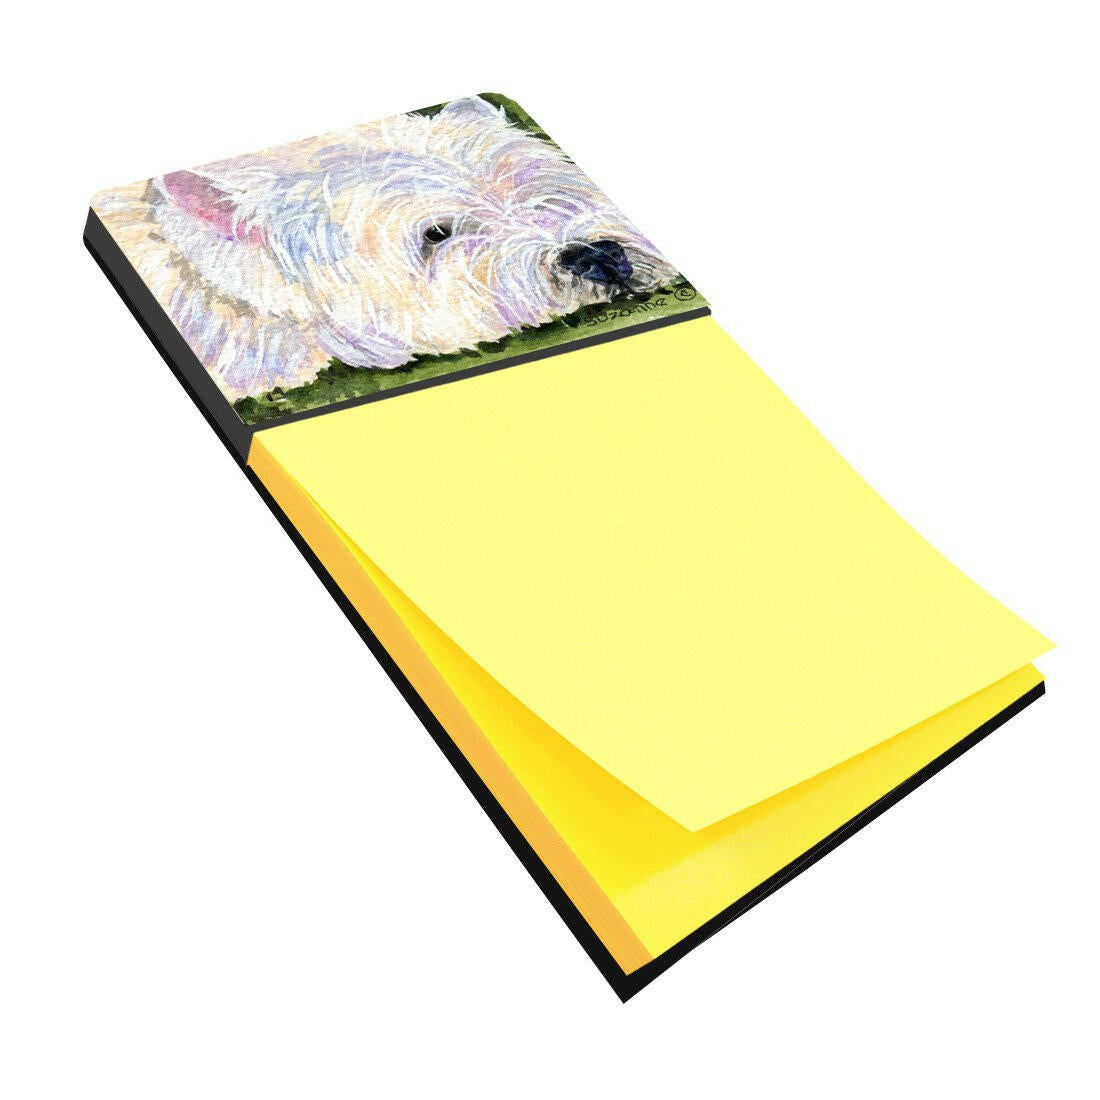 Westie Refiillable Sticky Note Holder or Postit Note Dispenser SS8831SN by Caroline's Treasures